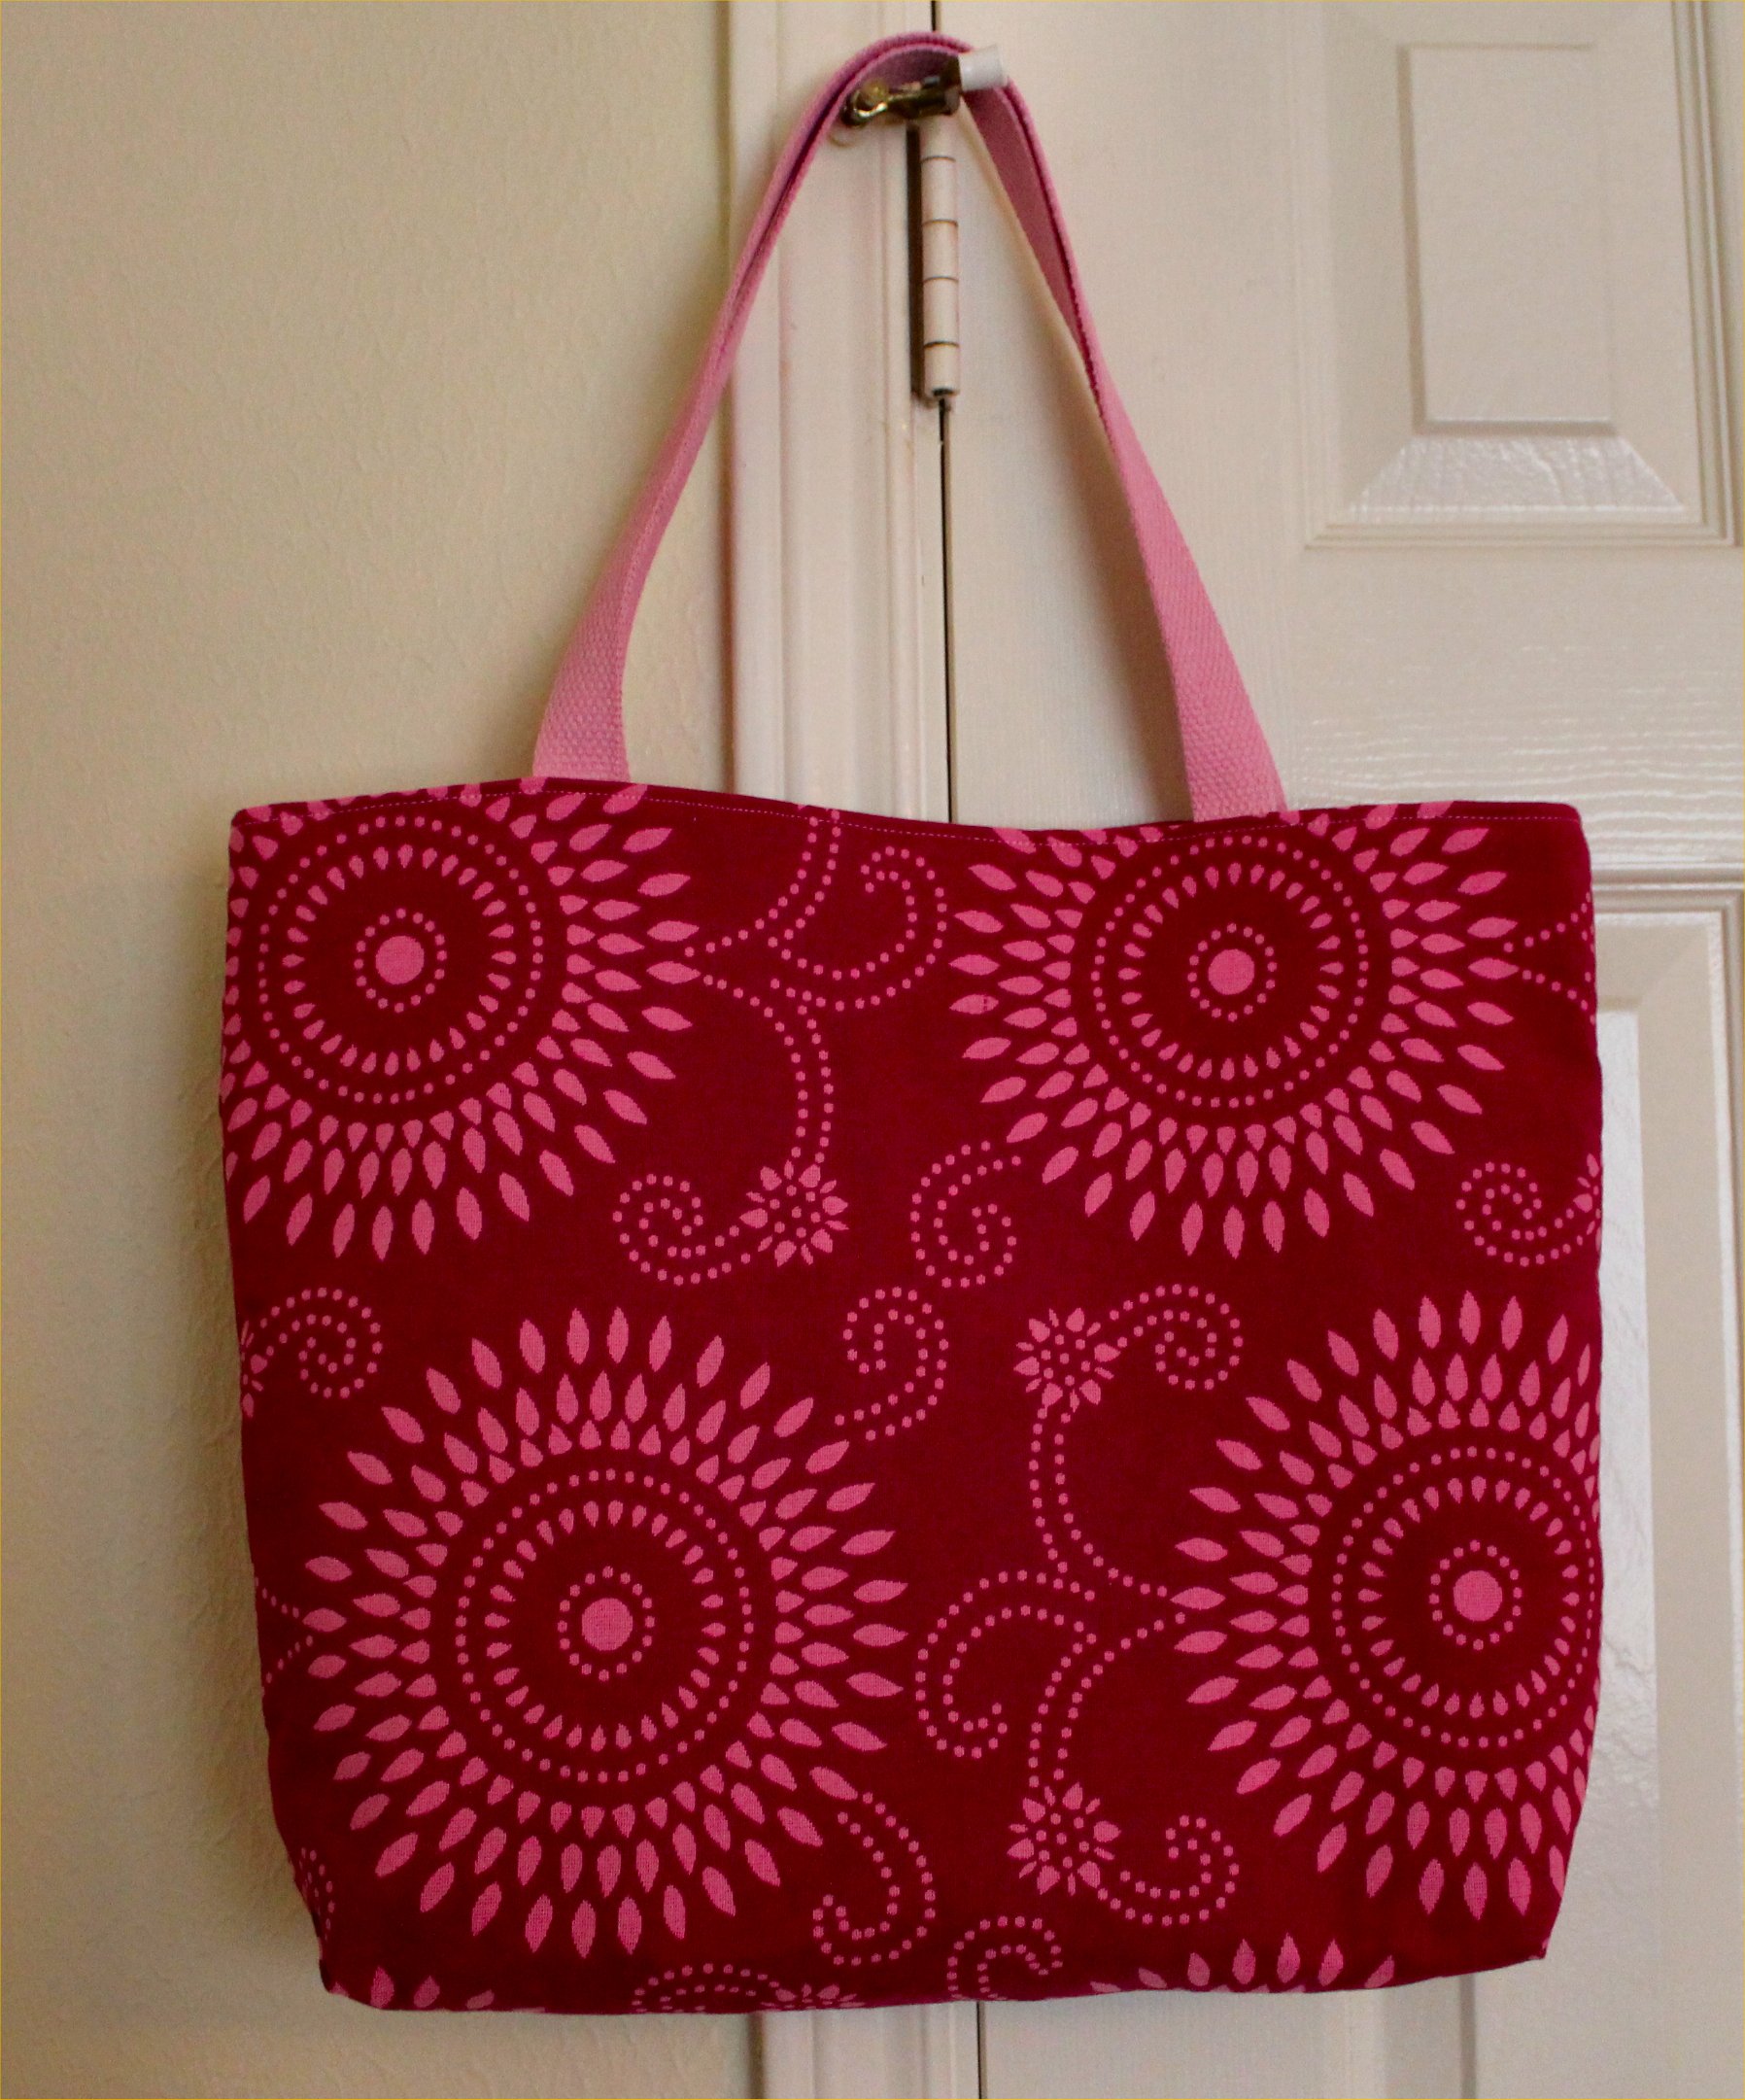 Tag Archives: how to make a tote bag out of upholstery fabric samples